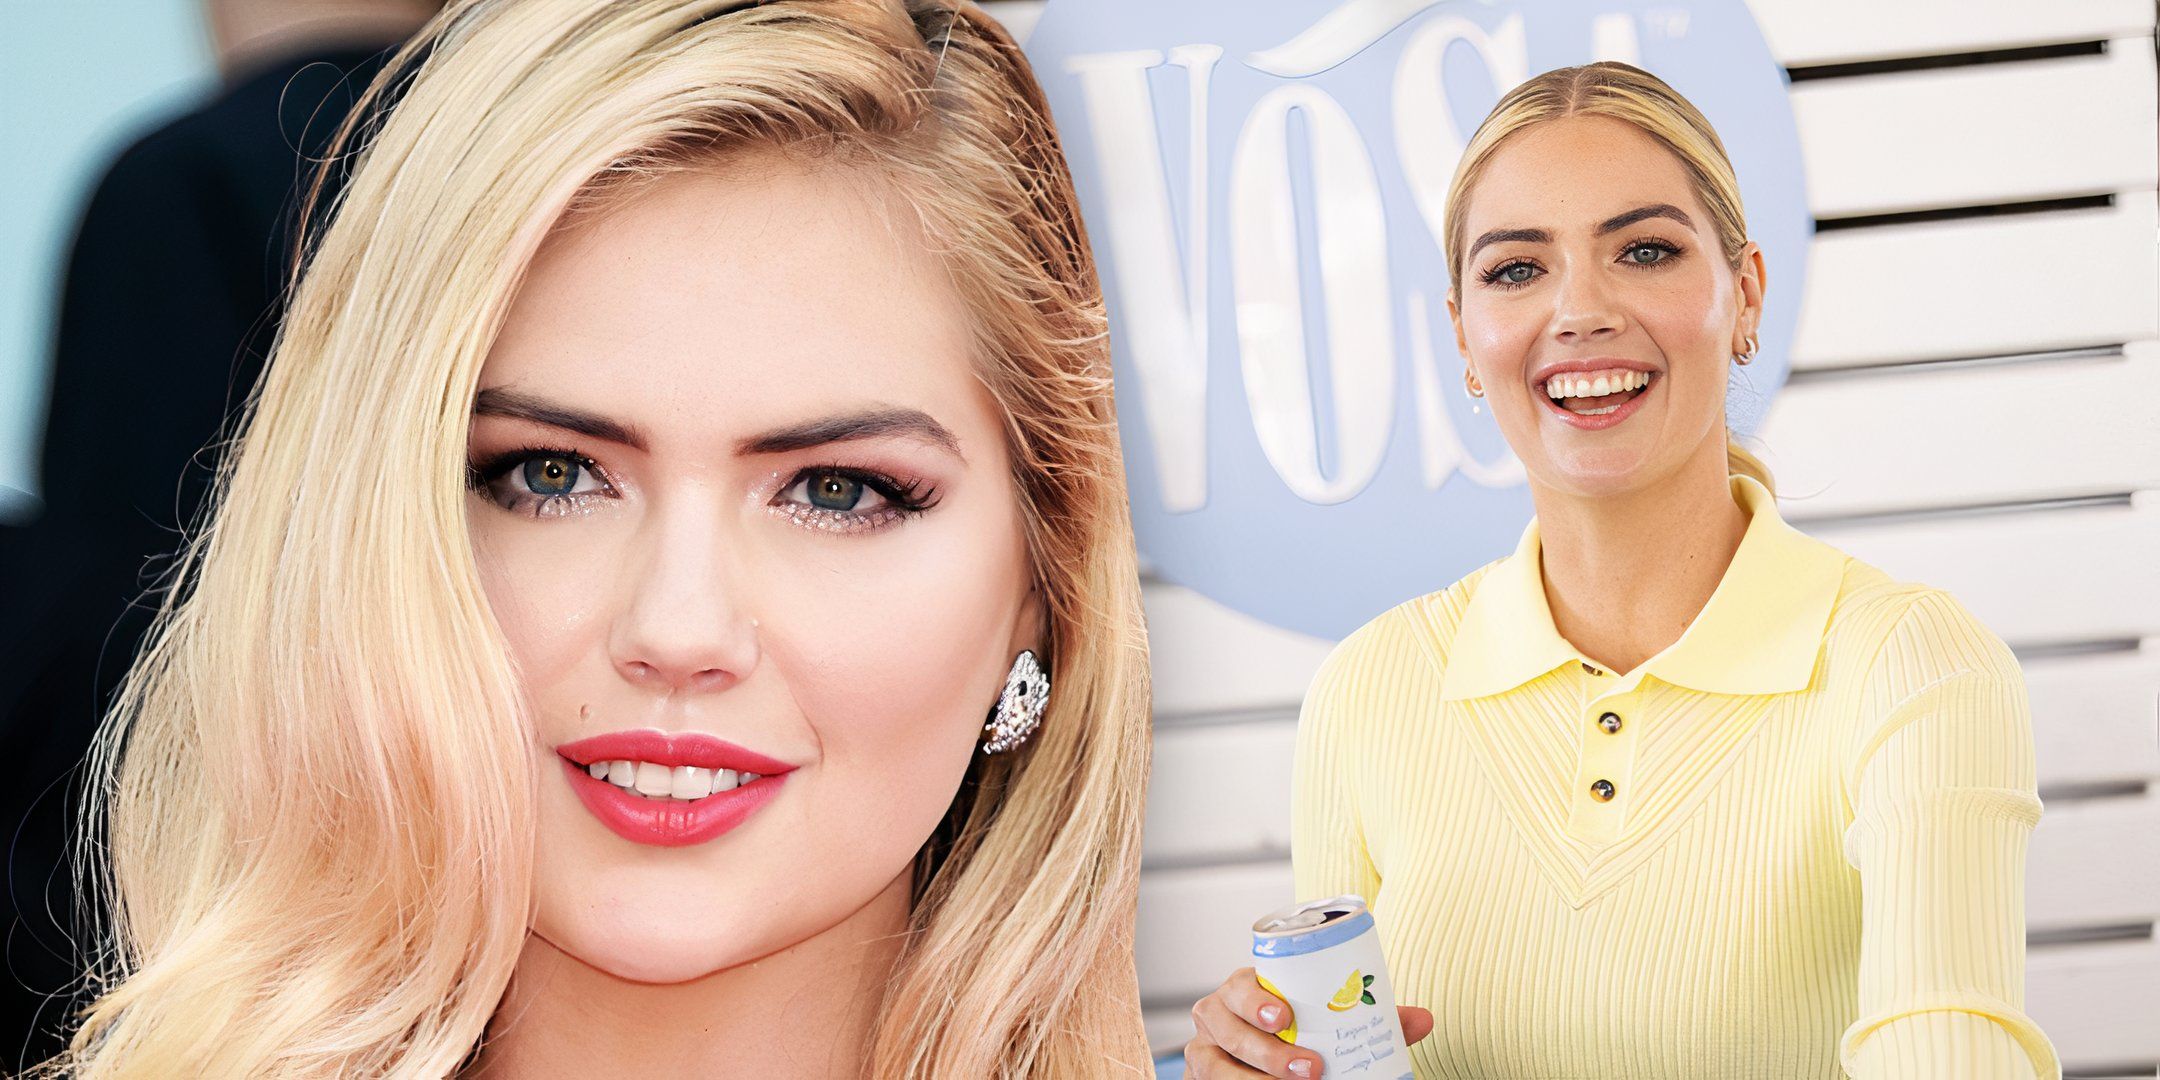 Sports Illustrated supermodel Kate Upton at event looking beautiful and stylish 